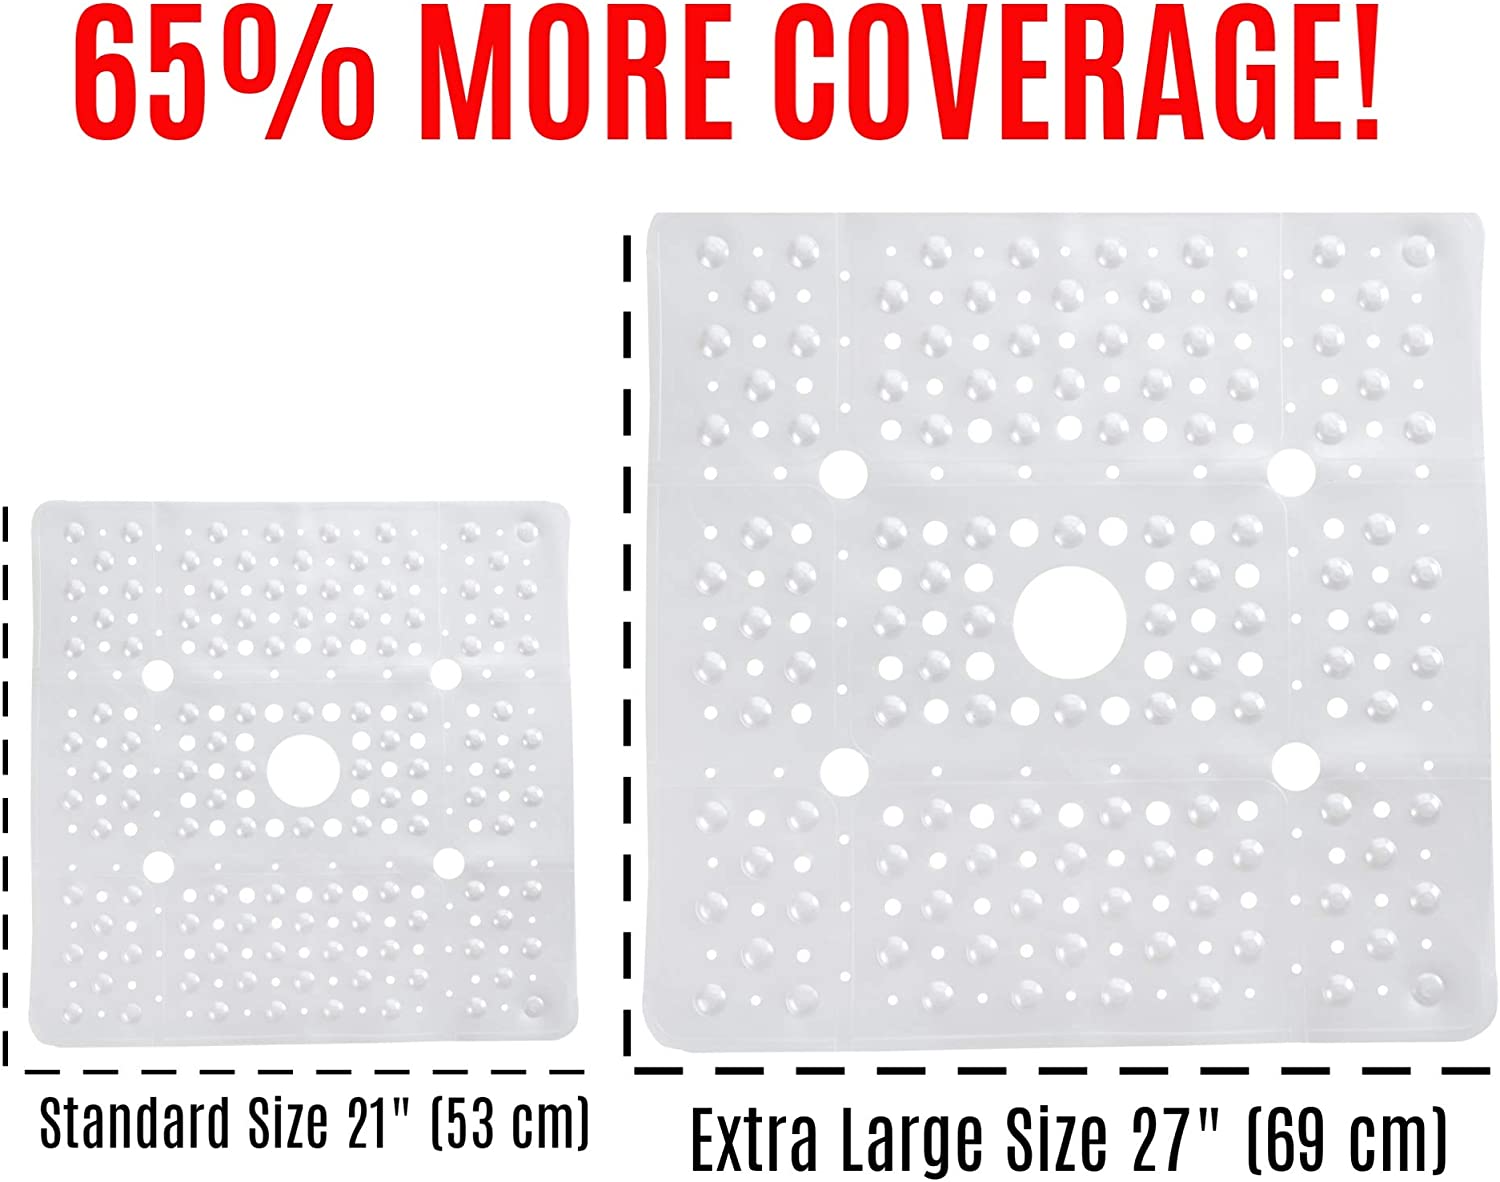 SlipX Solutions Extra Large Square Shower Mat. - e4cents